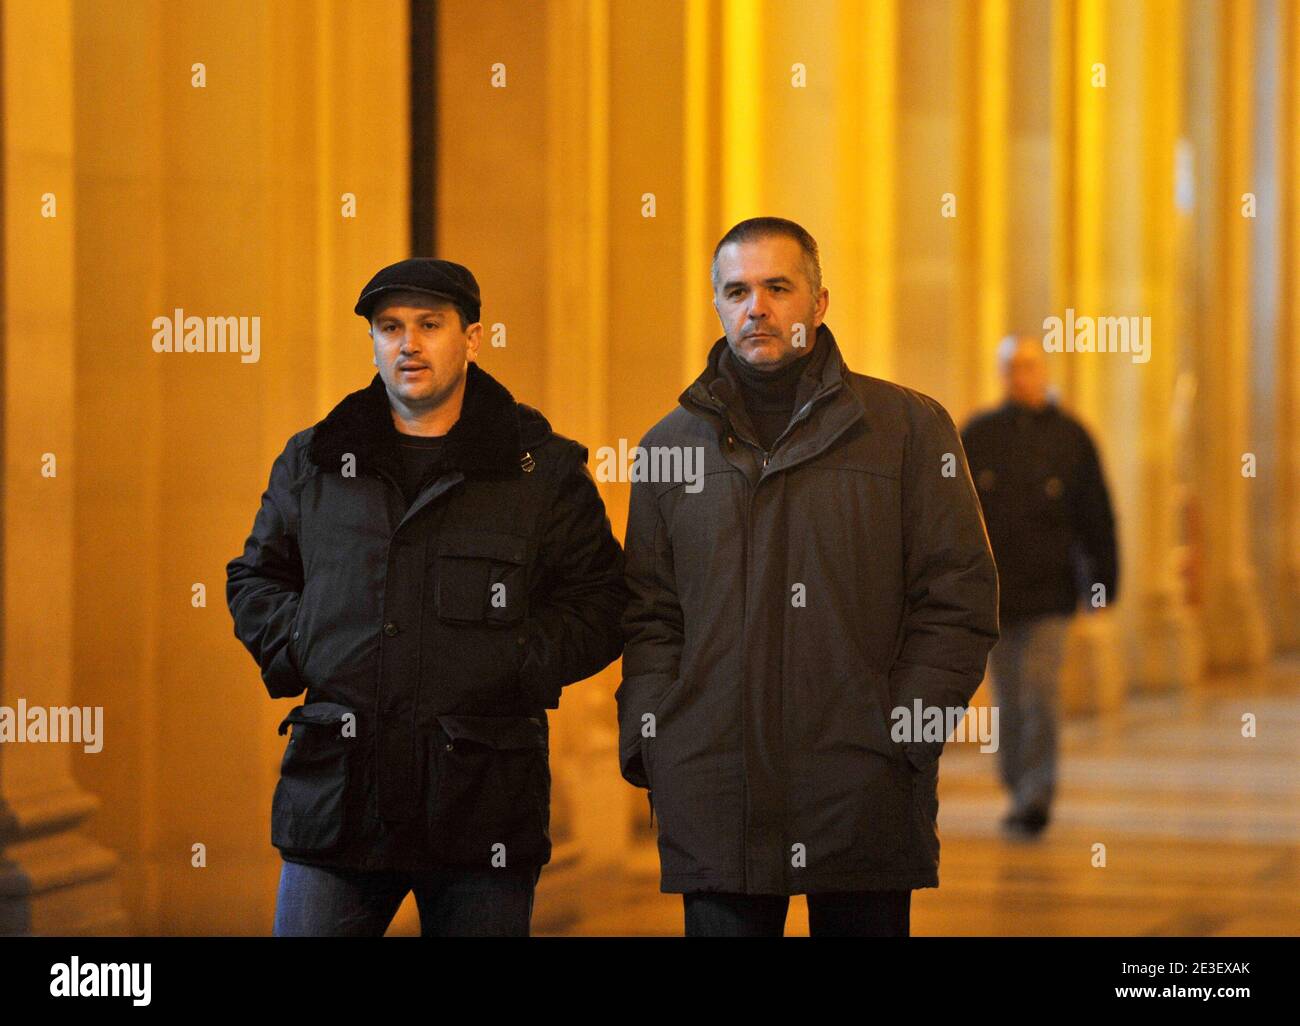 Stephane Colonna, Yvan Colonna's brother, arrives to the Paris courthouse to attend the Yvan Colonna Trial, in Paris, France, on February 9, 2009. Photo by Mousse/ABACAPRESS.COM Stock Photo